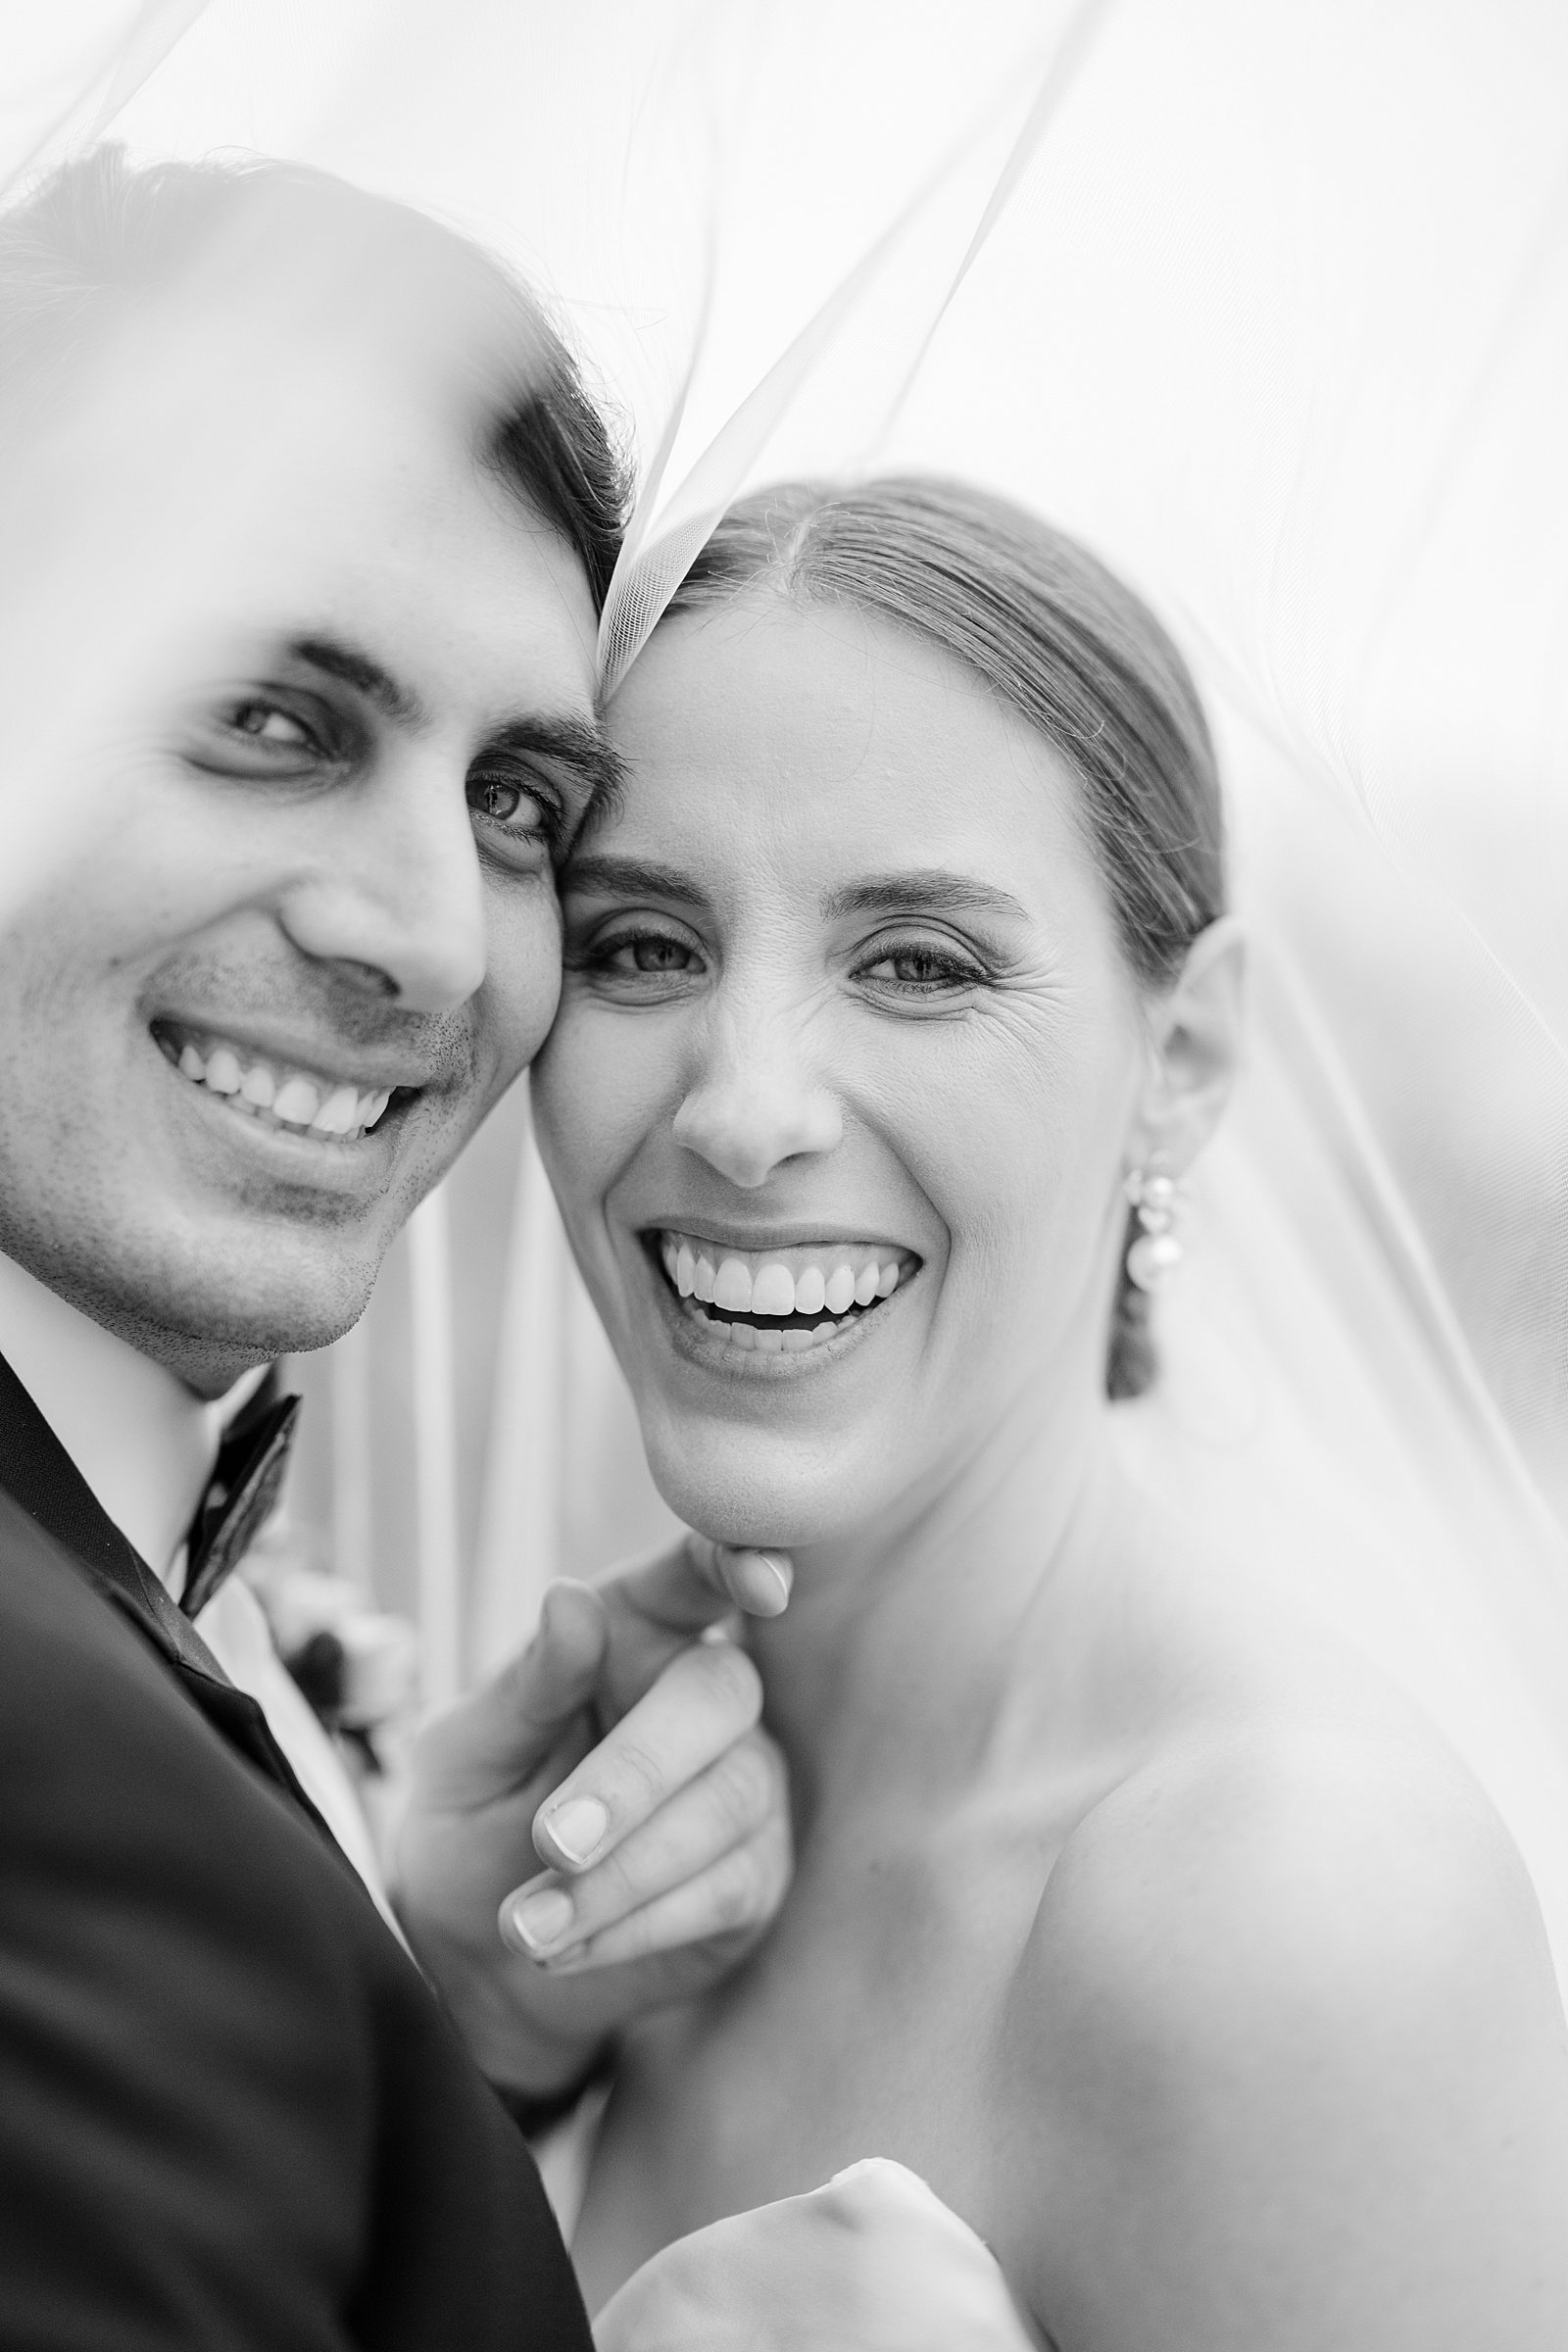 colorful winter wedding in columbus, ga - bride and groom laughing under the veil in black and white 